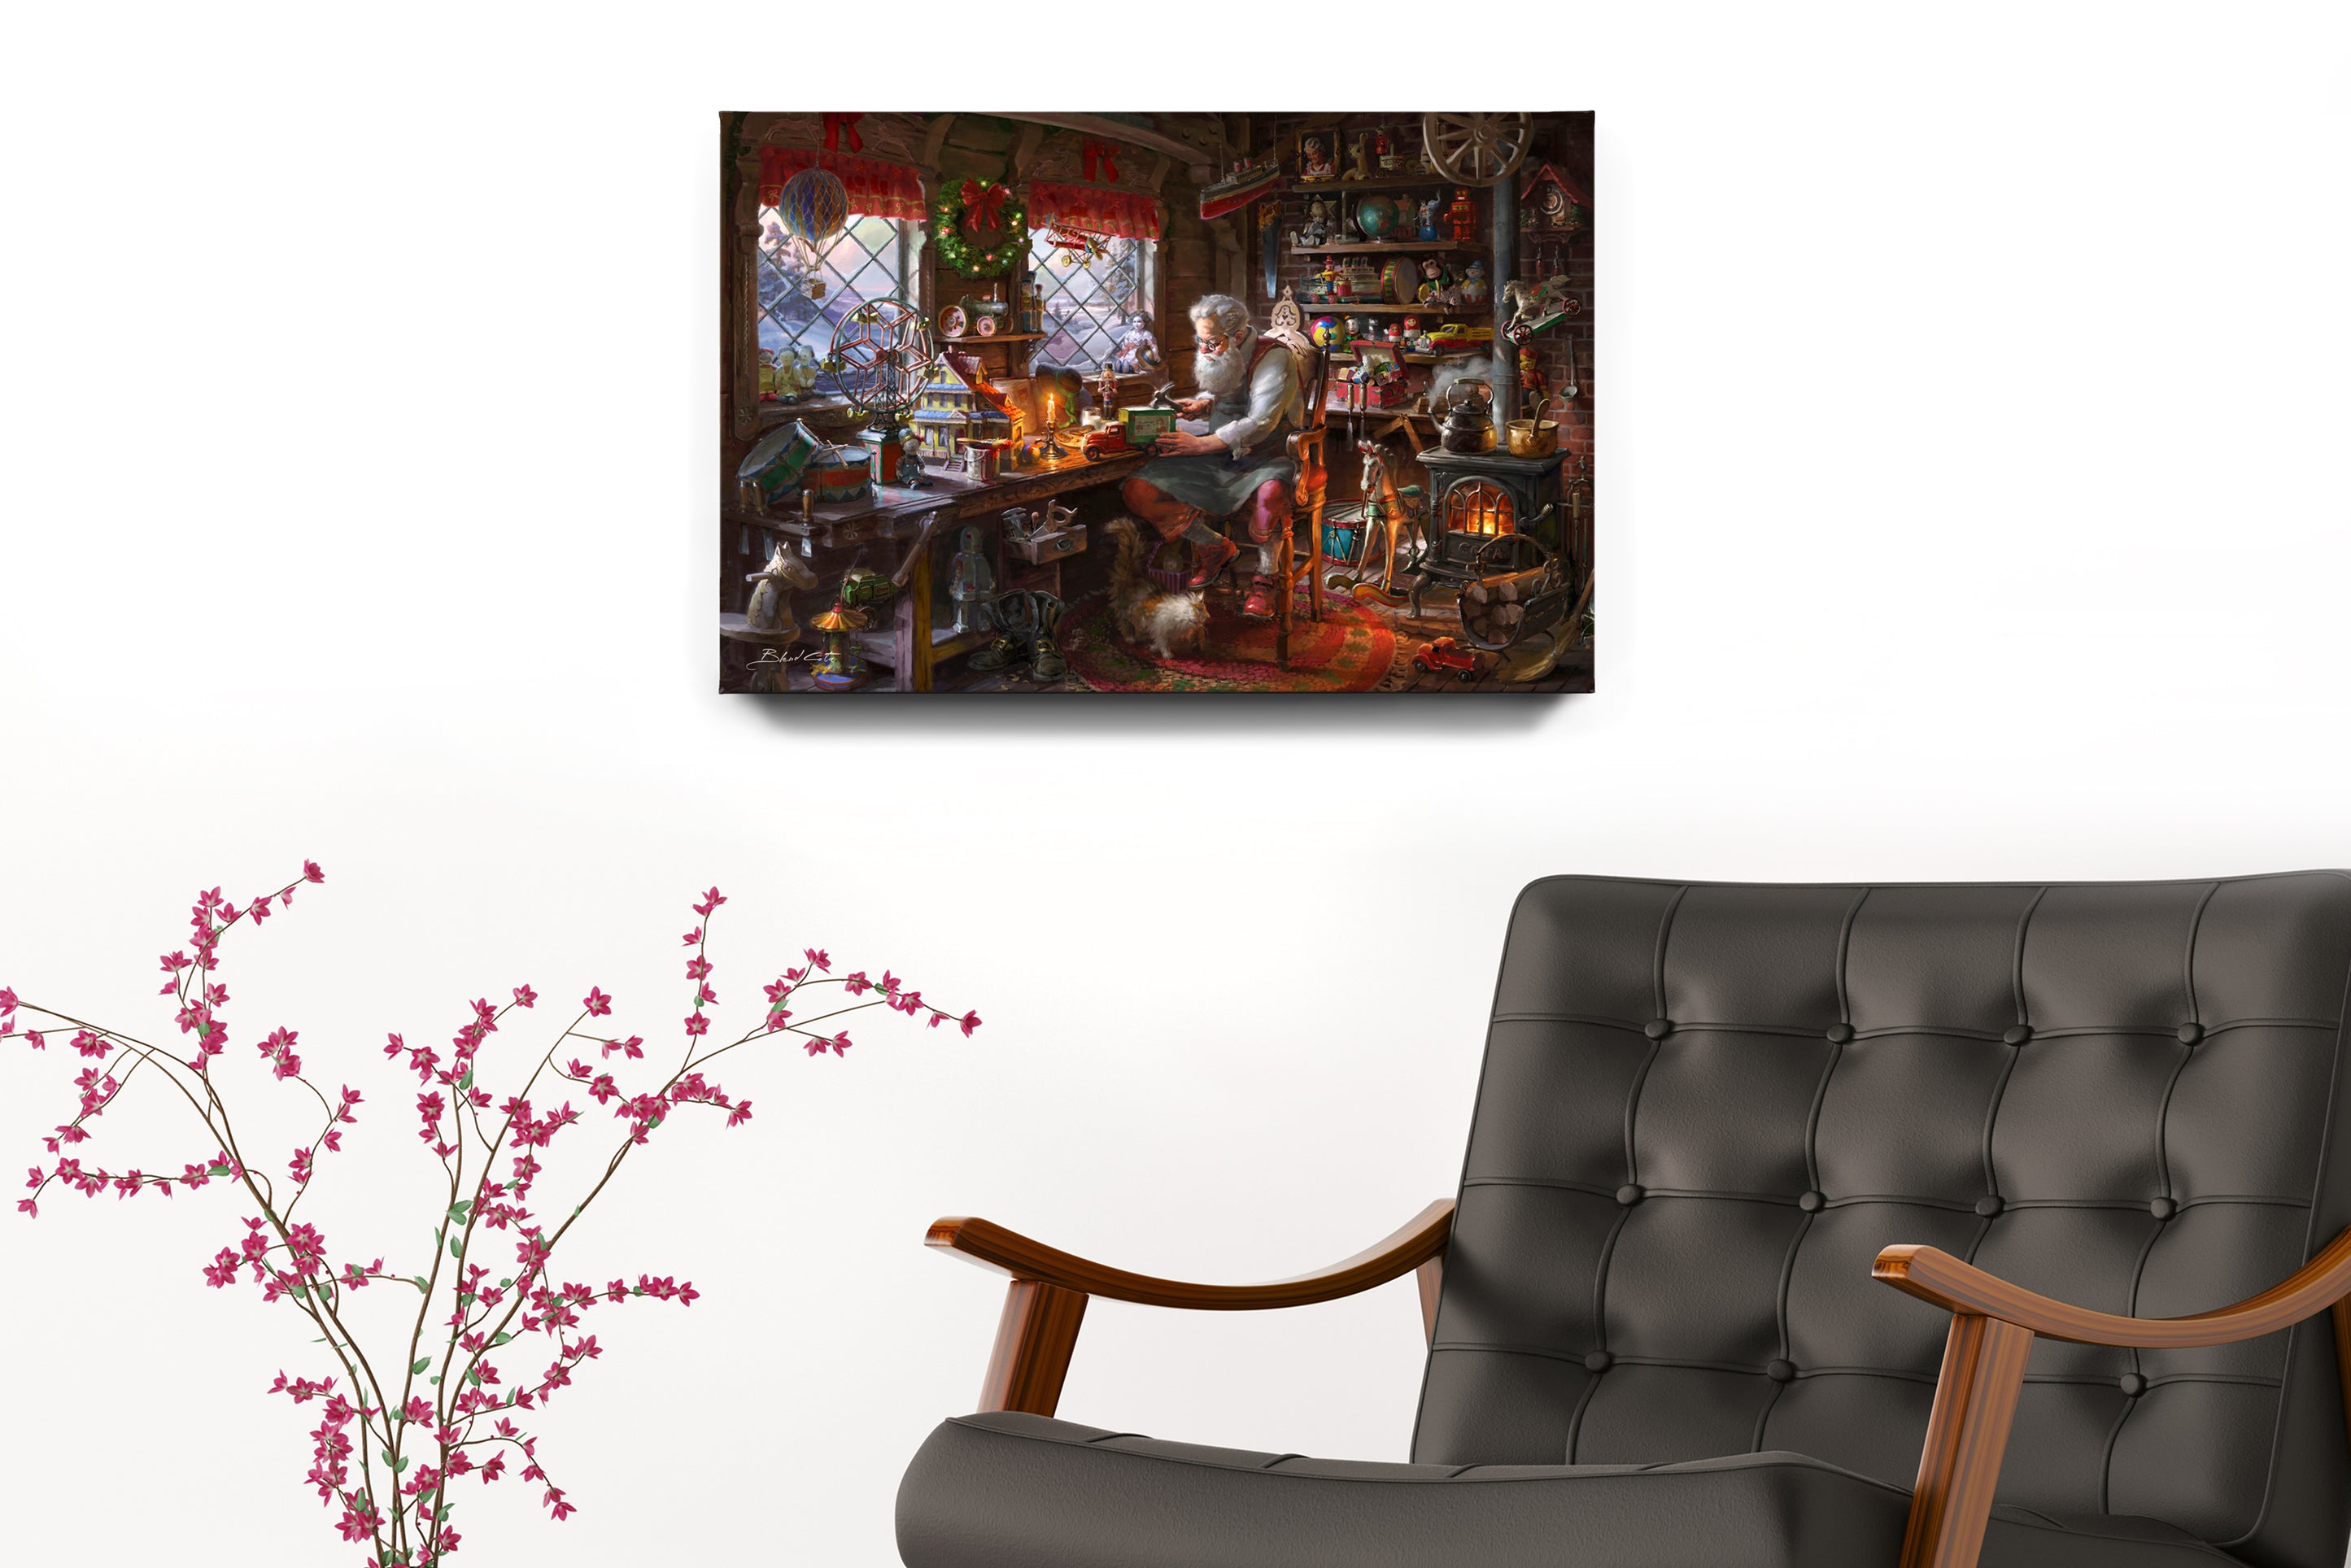 An art print on gallery wrapped canvas of the painting of Santa claus making toys in his workshop  during christmas with a cat by his boots and wood burning stove amongst the many children's toys in a room setting.